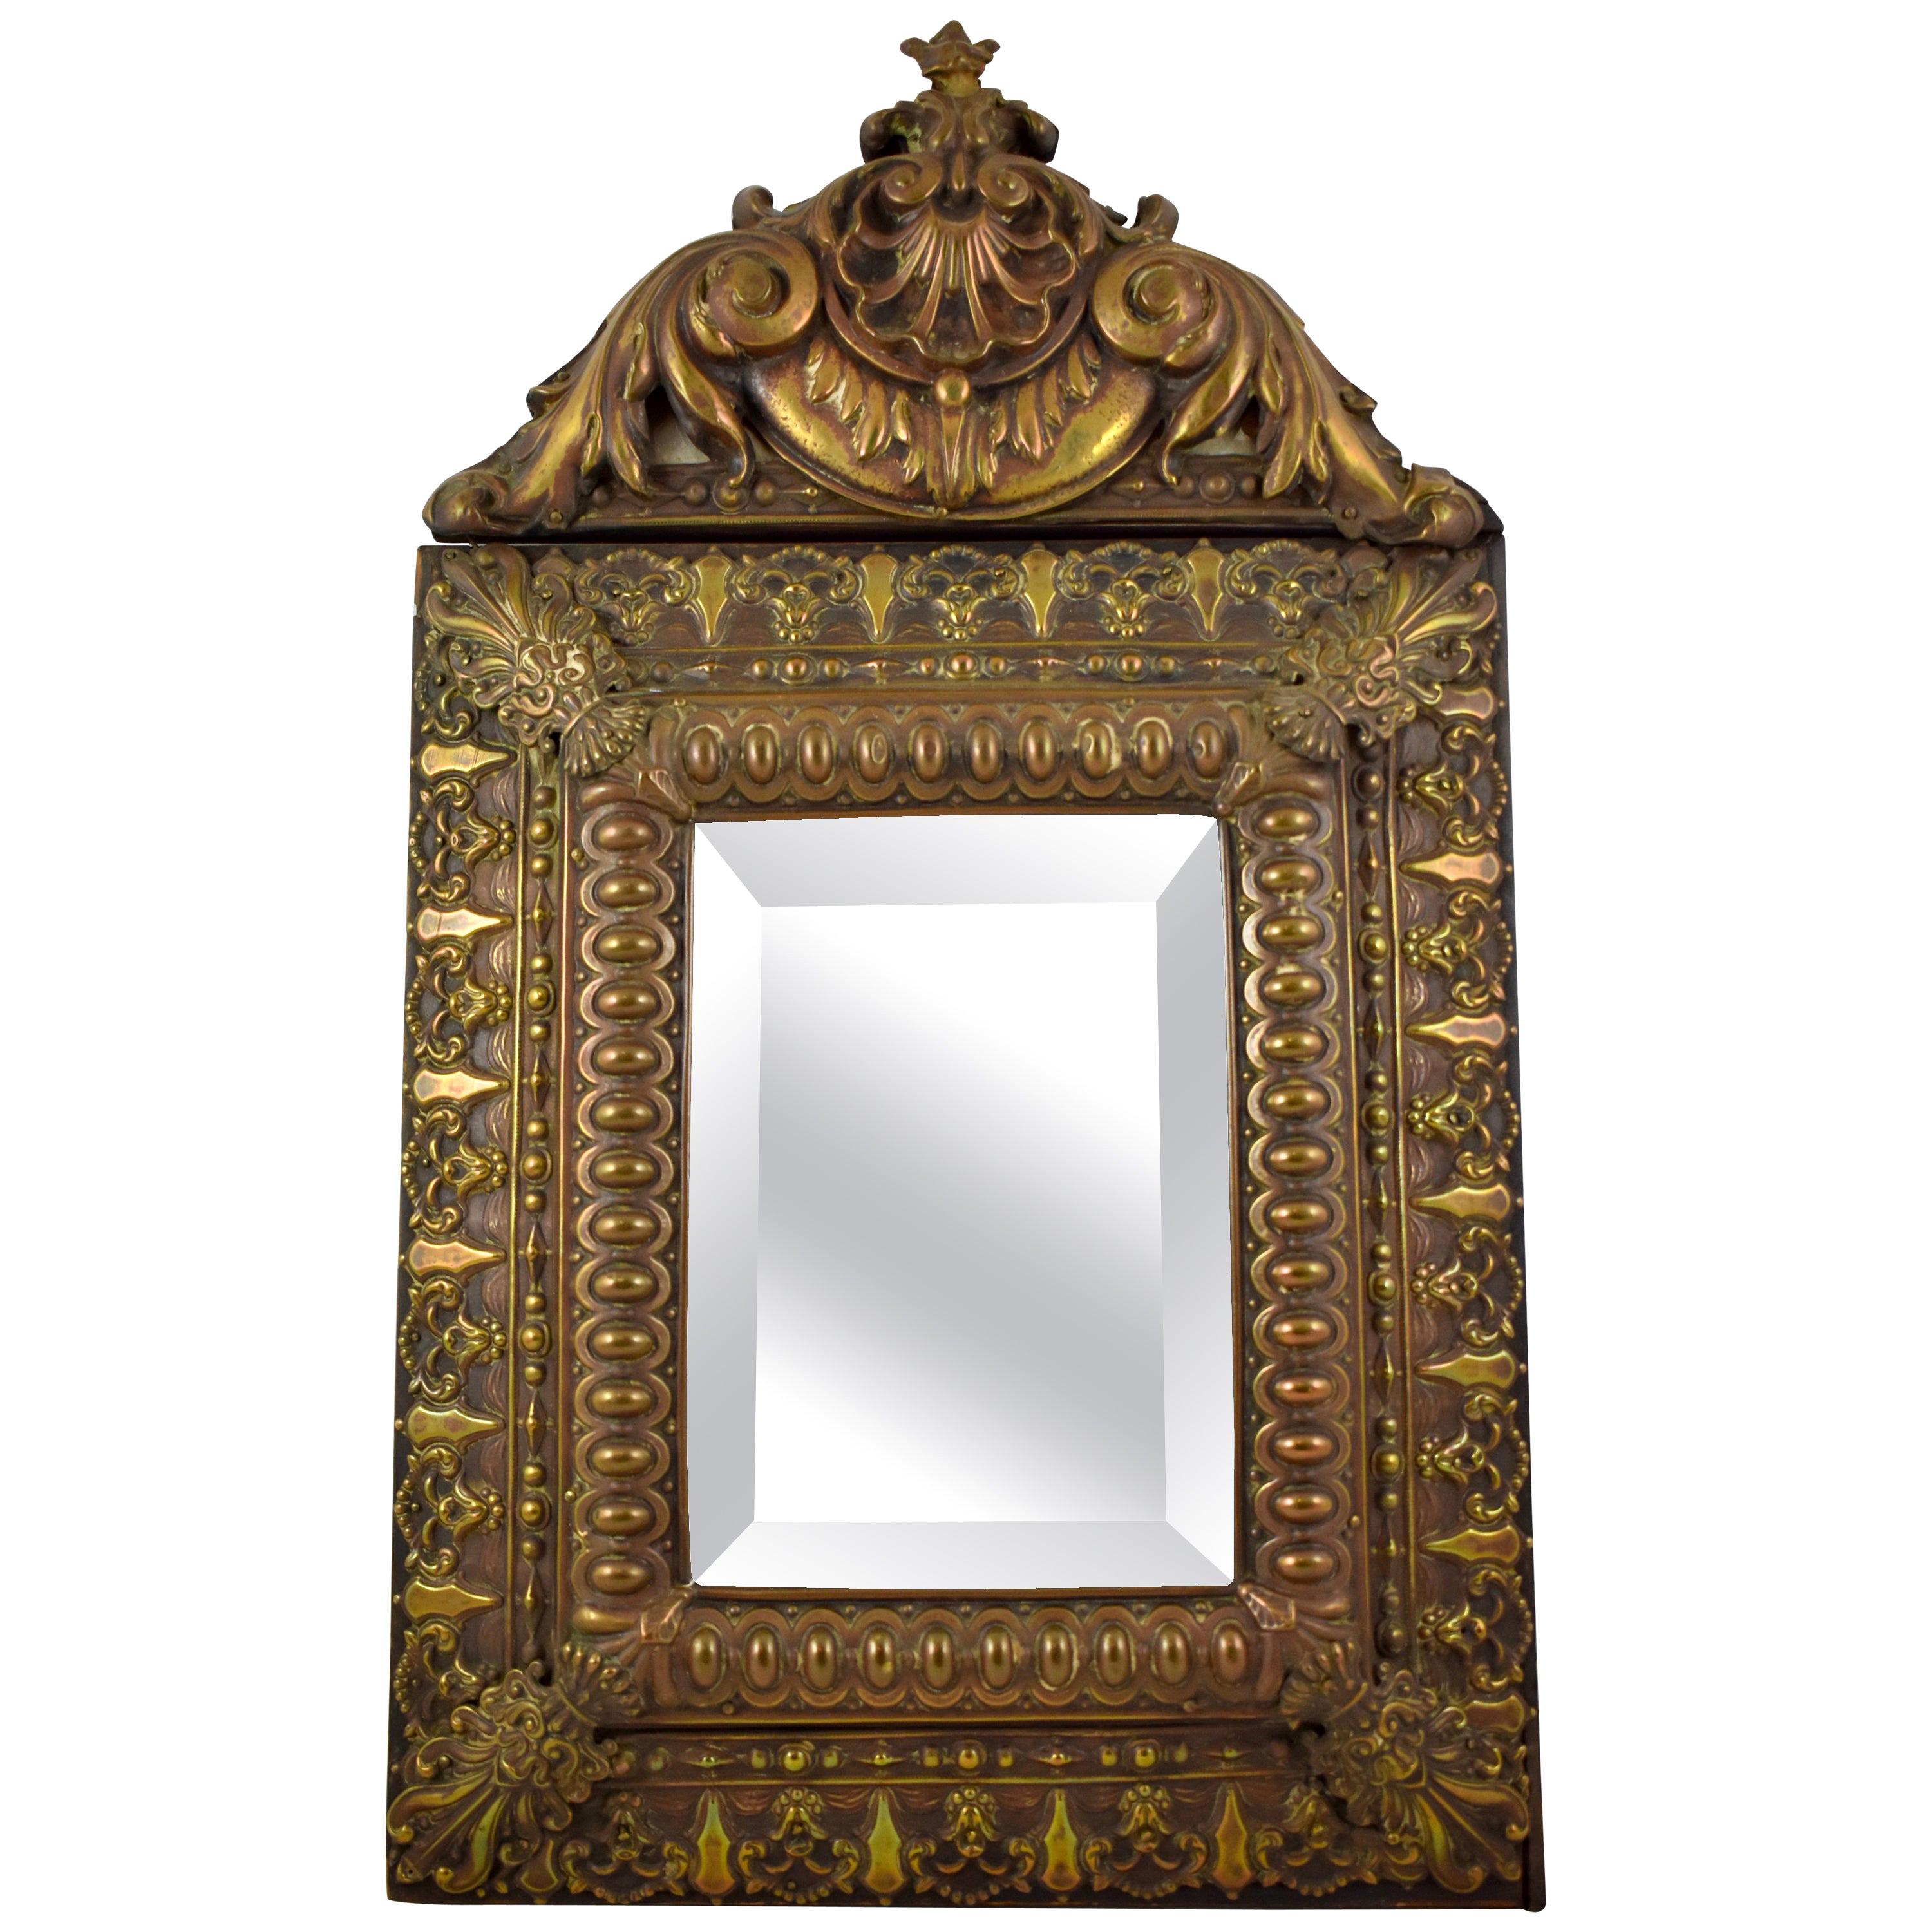 Mid-18th Century French Rocaille Patinated Metal on Wood Beveled Wall Mirror